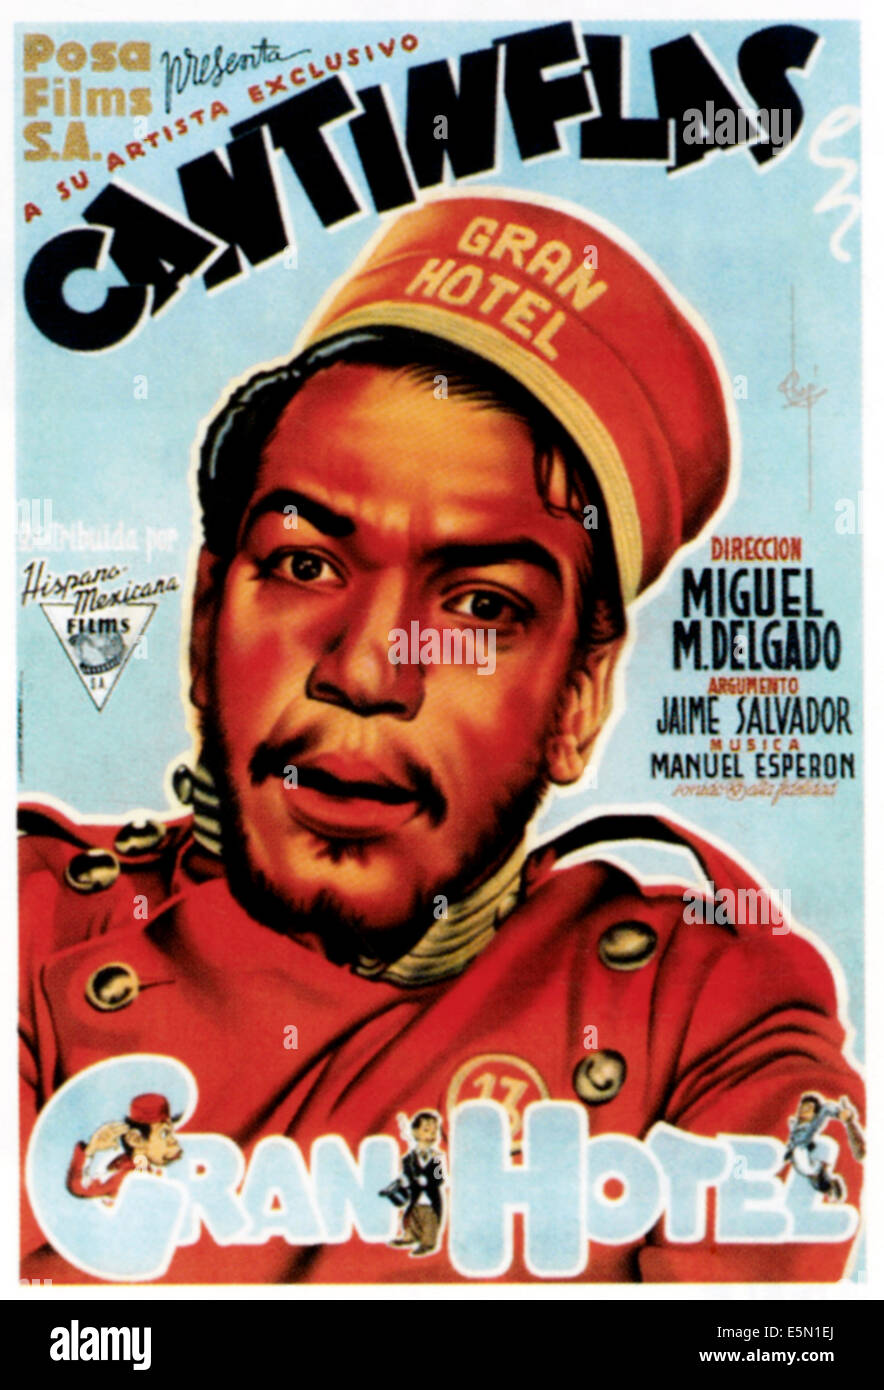 GRAN HOTEL, Cantinflas on Spanish poster art, 1944 Stock Photo